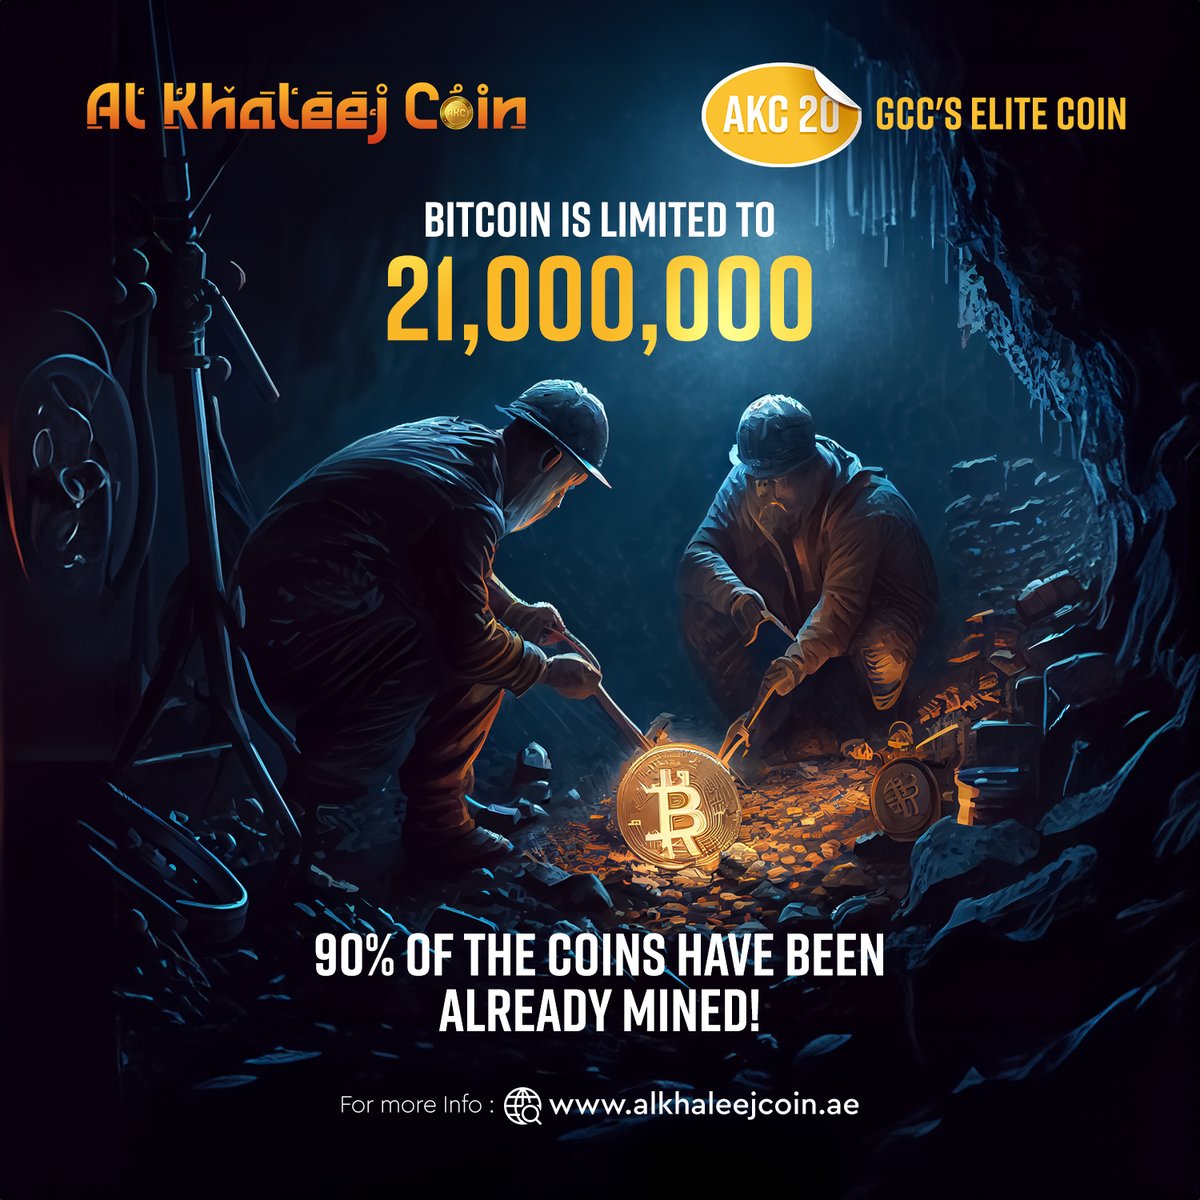 💰 Did you know? The total number of bitcoins is capped at 21,000,000. 😱Adding more coins requires code alterations🤯😎. #Bitcoin #CryptoFacts #akc #alkhaleejcoin #gcccoin #GCC #coin #cryptocurrencies